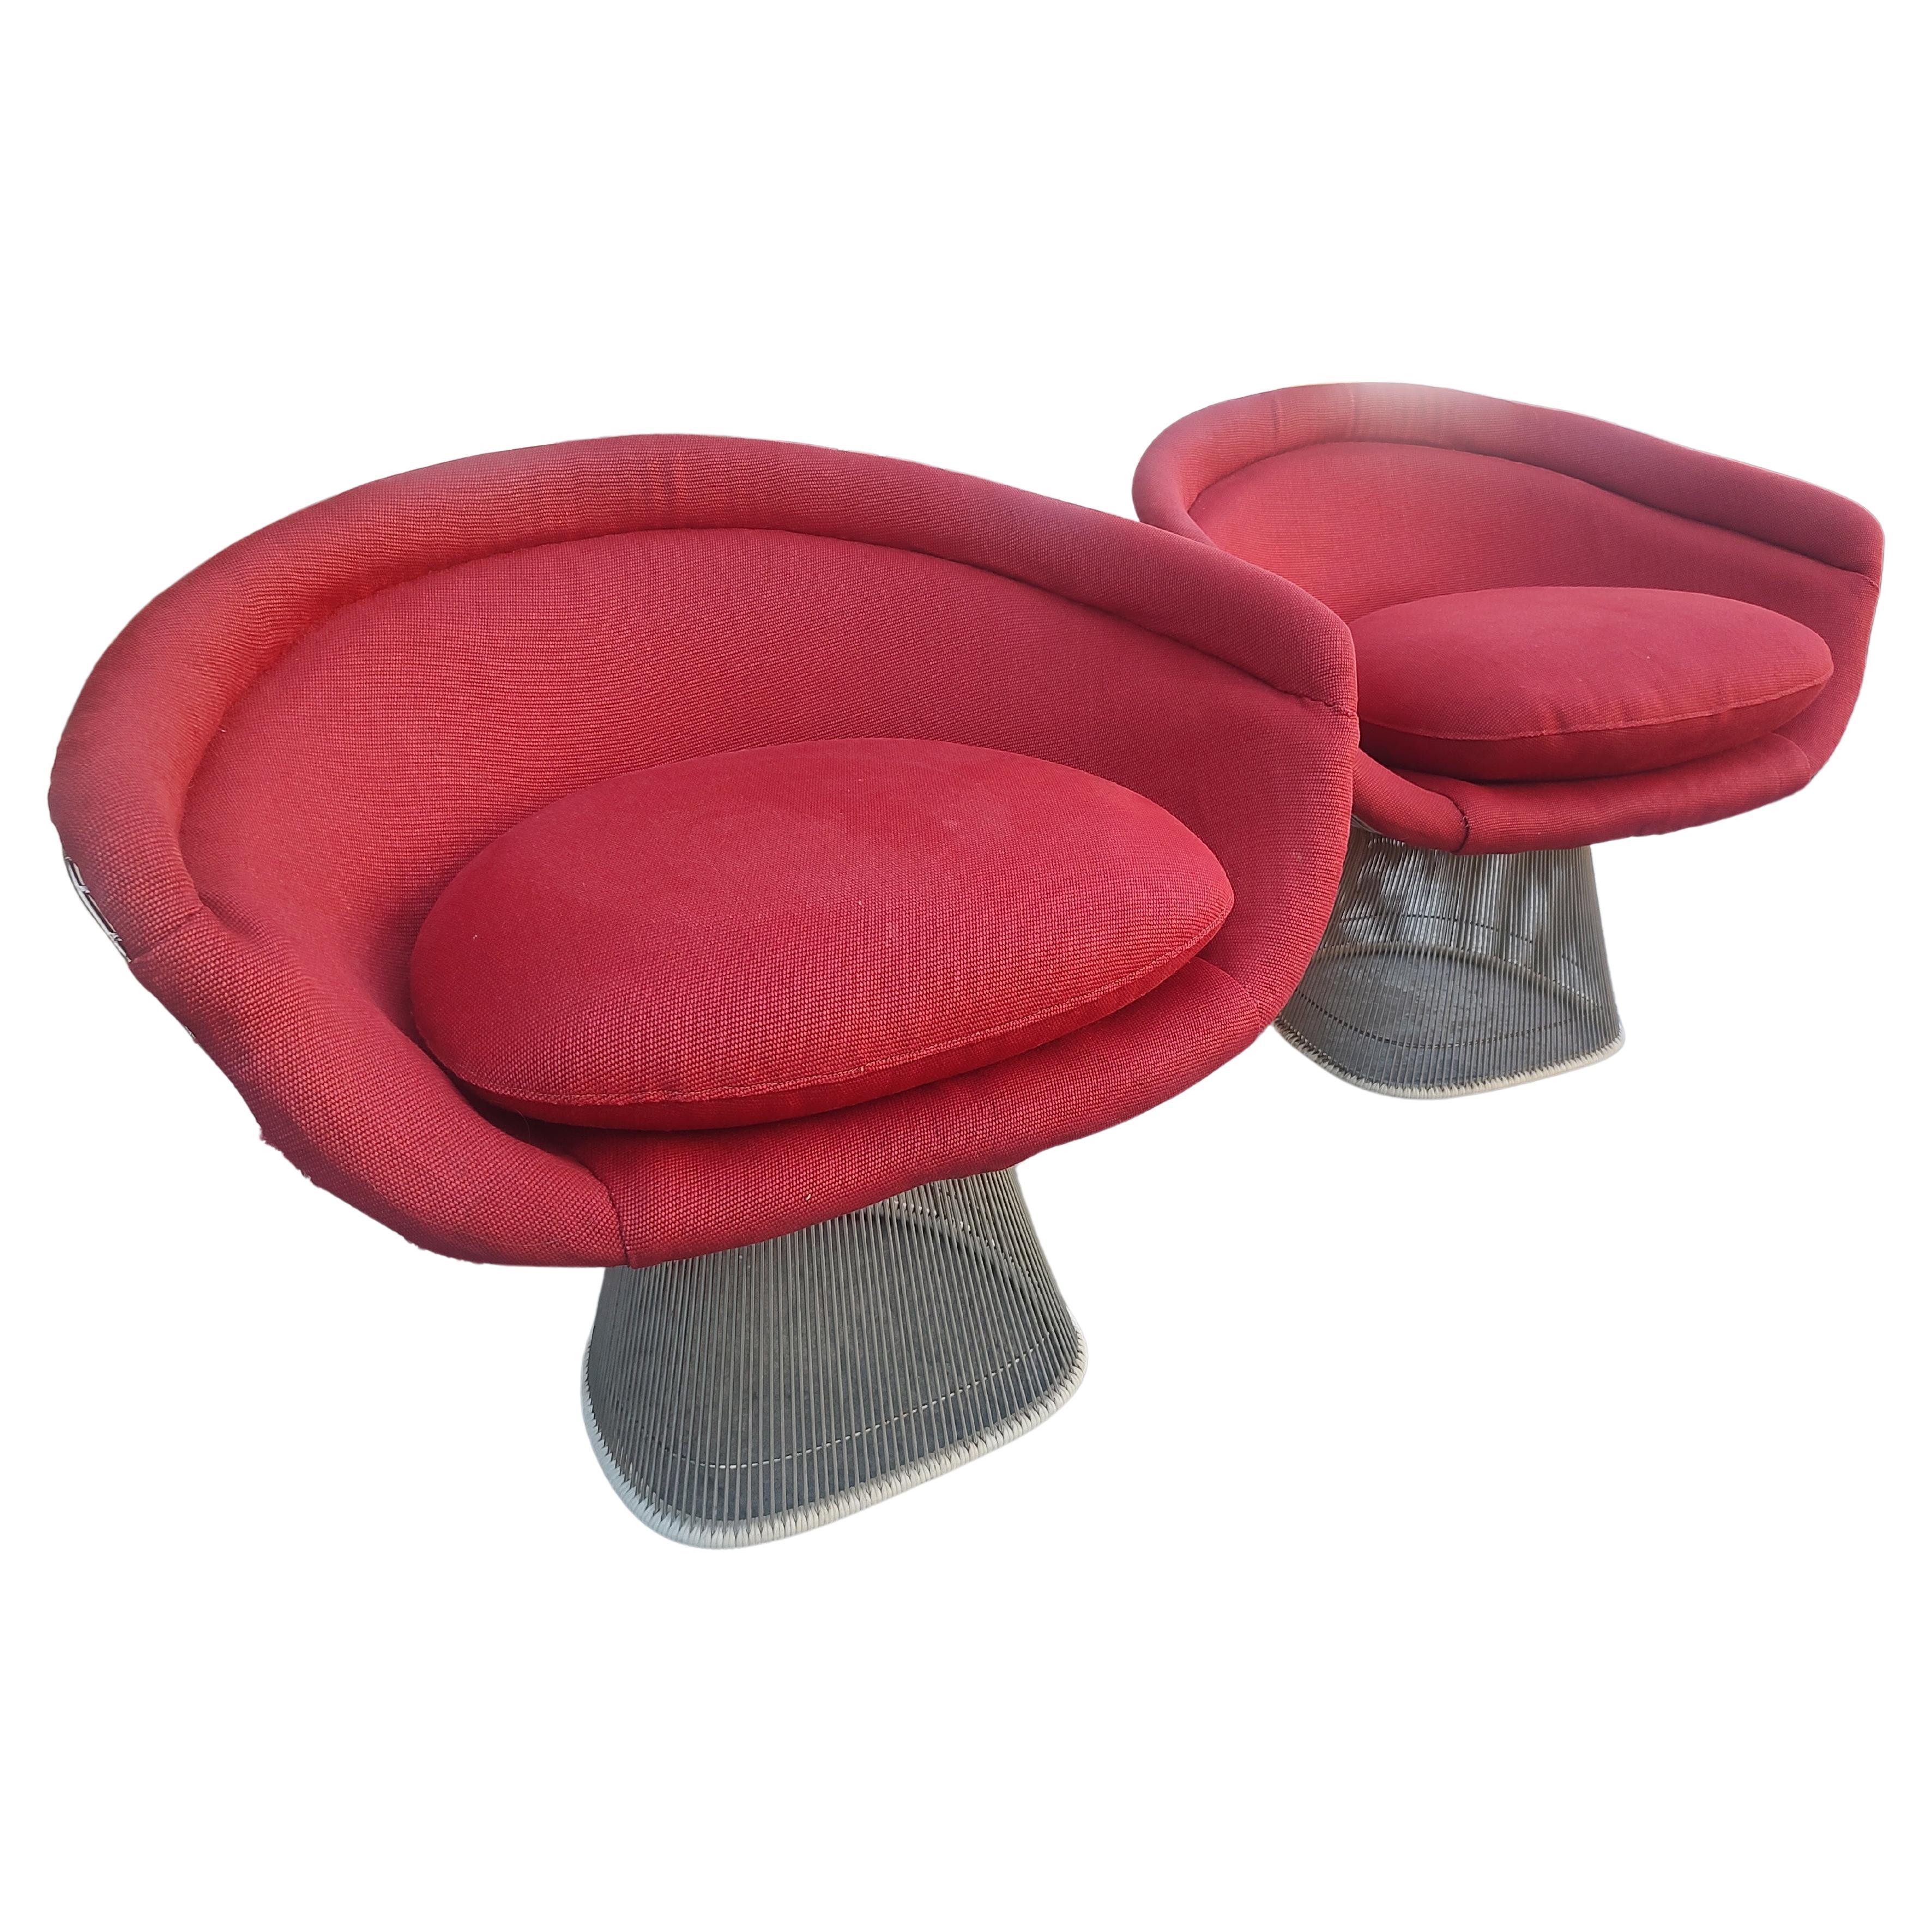 Fantastic pair of Mid Century Modern Sculptural Lounge Chairs by Warren Platner for Knoll International. C1965 chairs which have a table pictured but not included and am ottoman also not included but in other listings separately. This pair of lounge